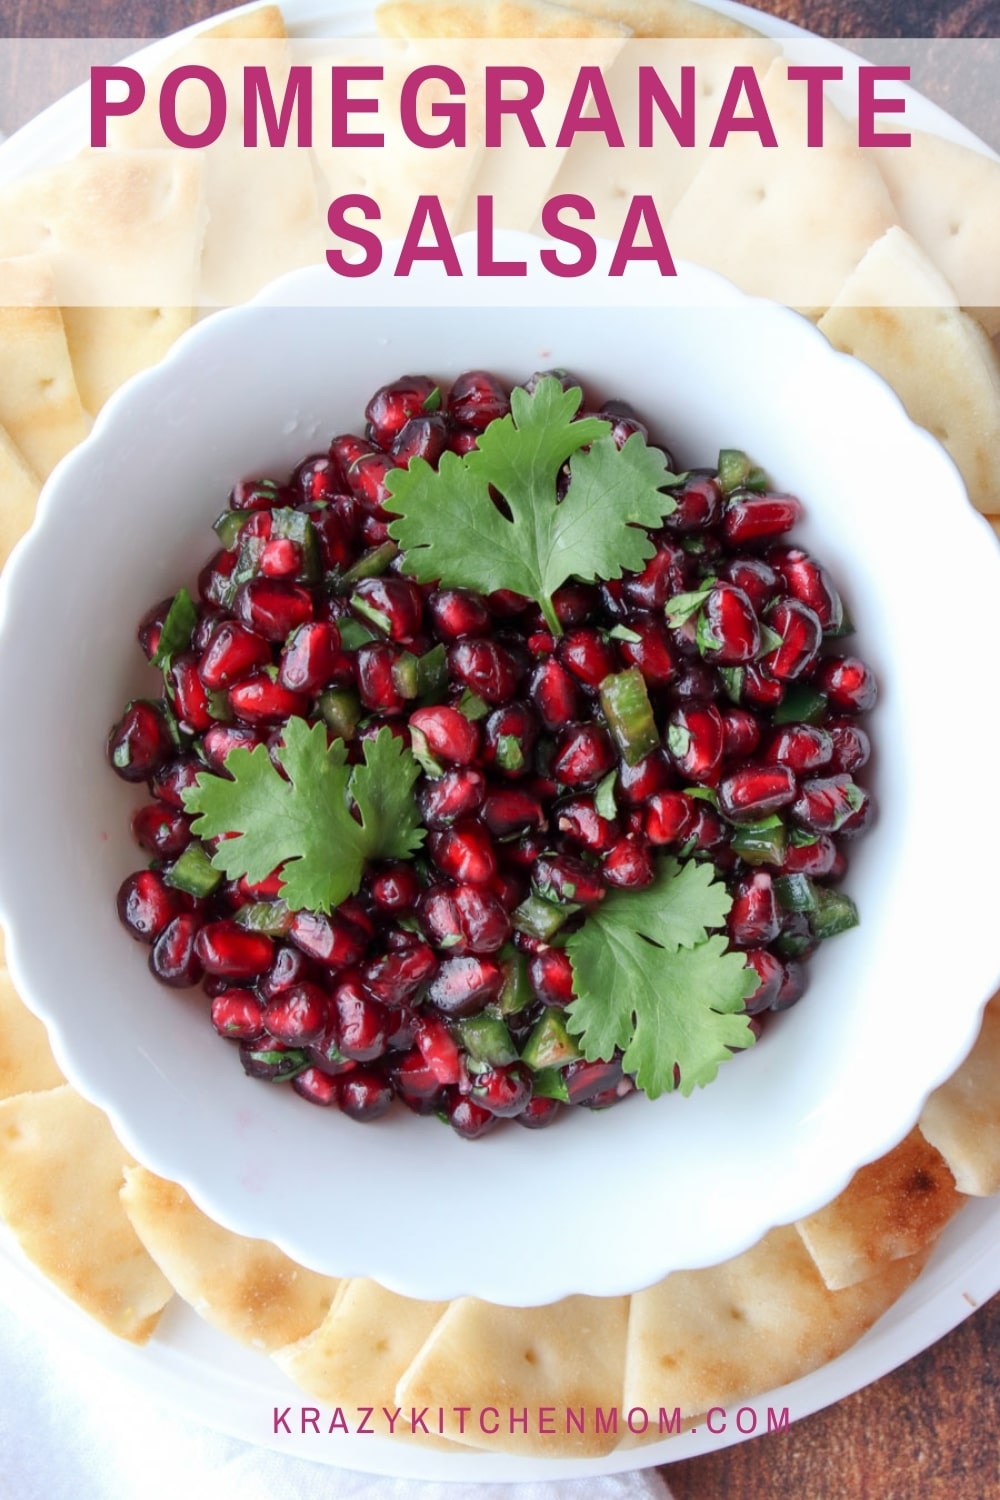 Ring in the New Year with a fresh delicious winter salsa filled with little red jewels of bursting flavor. via @krazykitchenmom